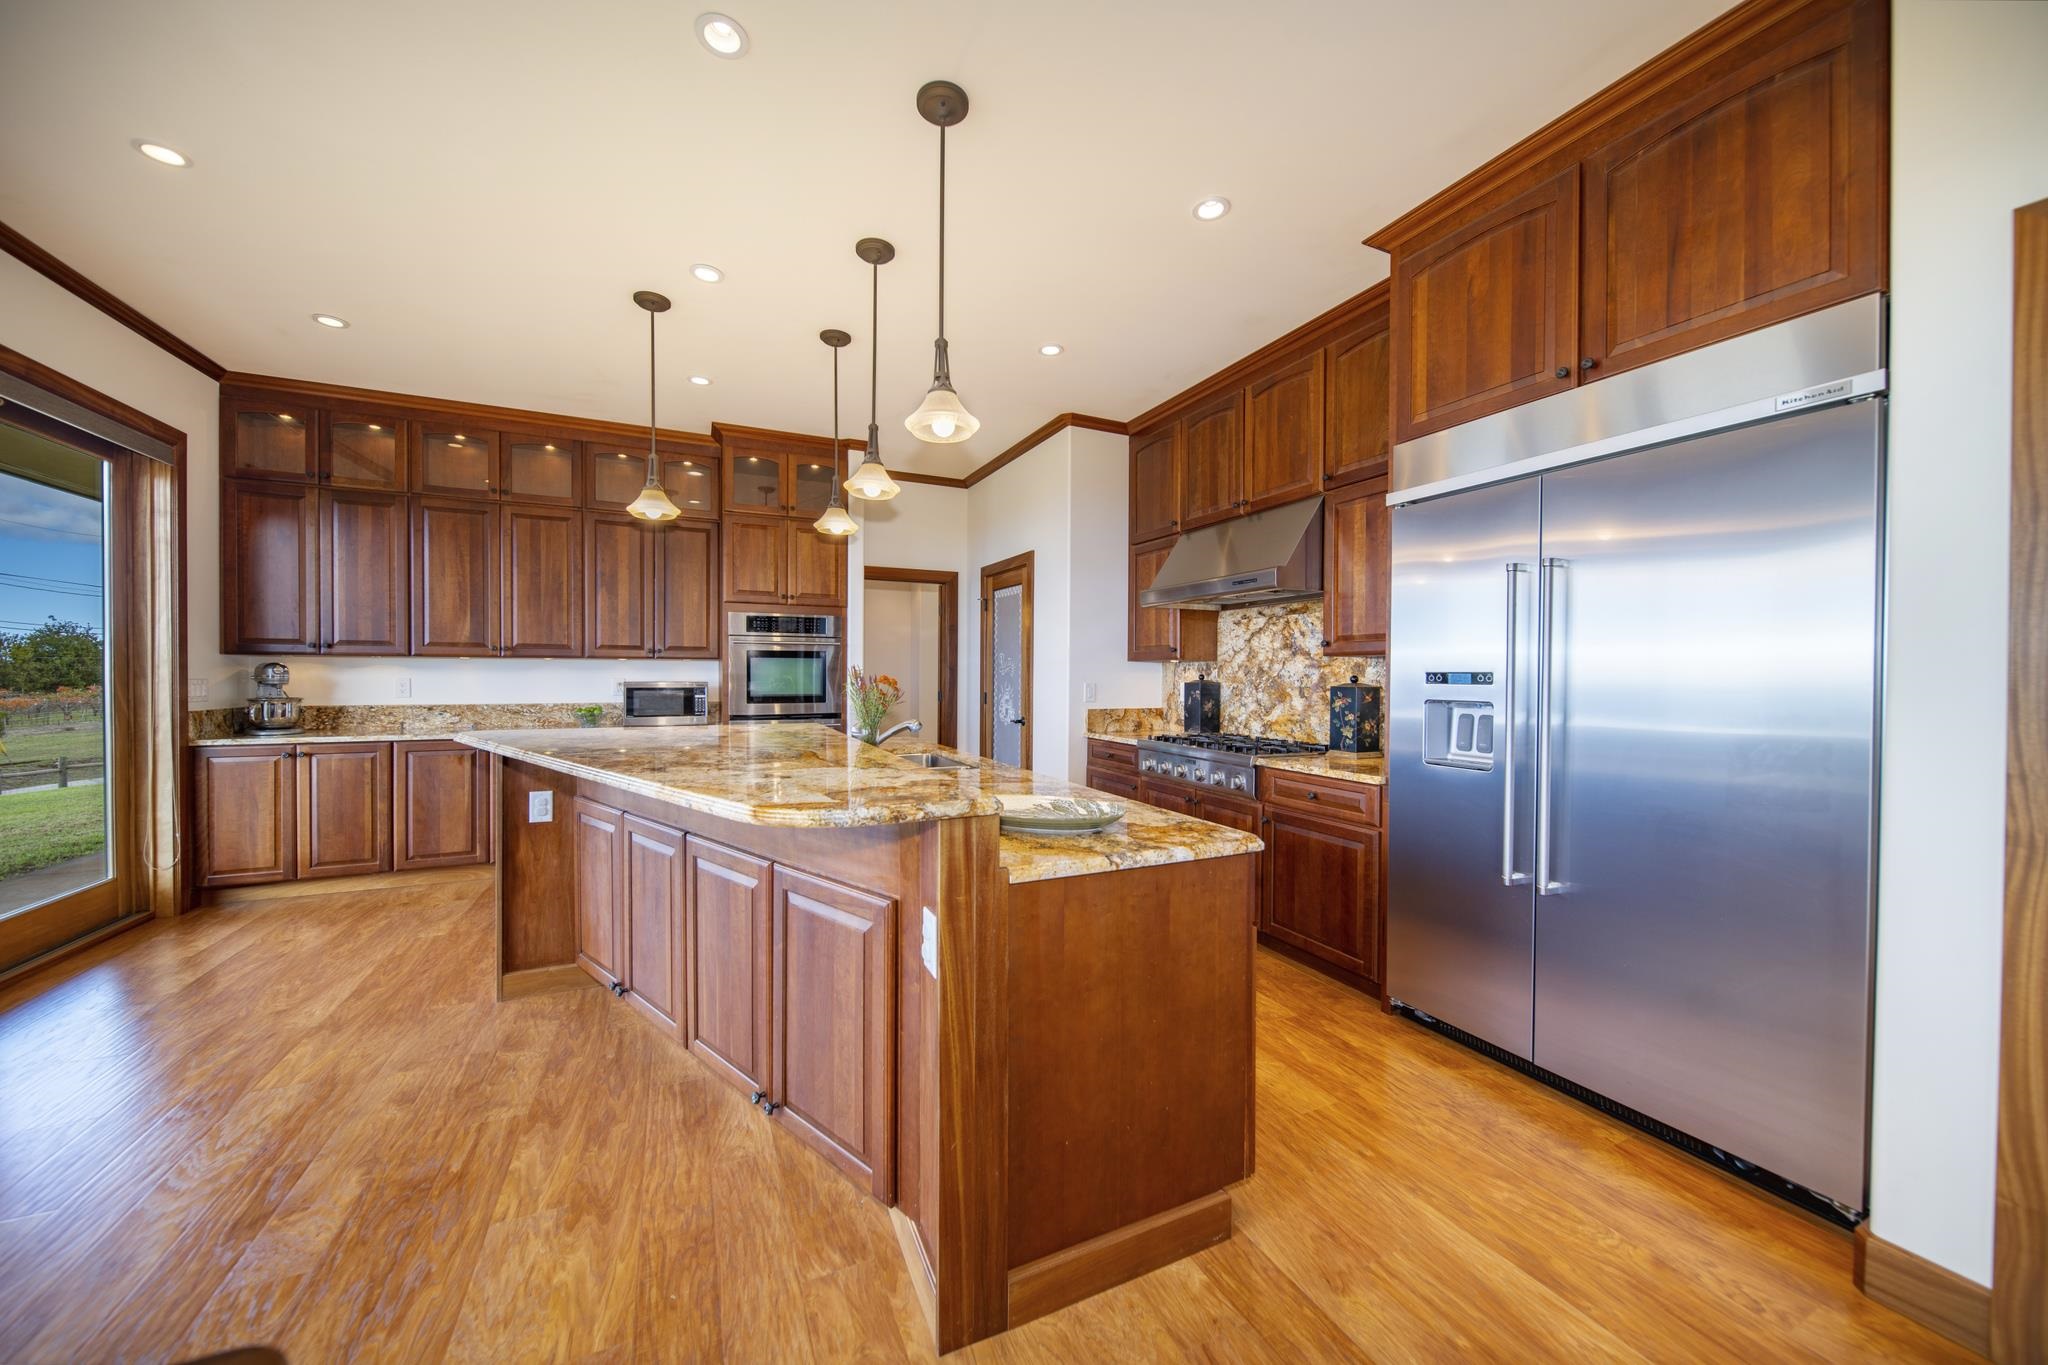 a large kitchen with stainless steel appliances kitchen island granite countertop a large kitchen island and a wooden floors